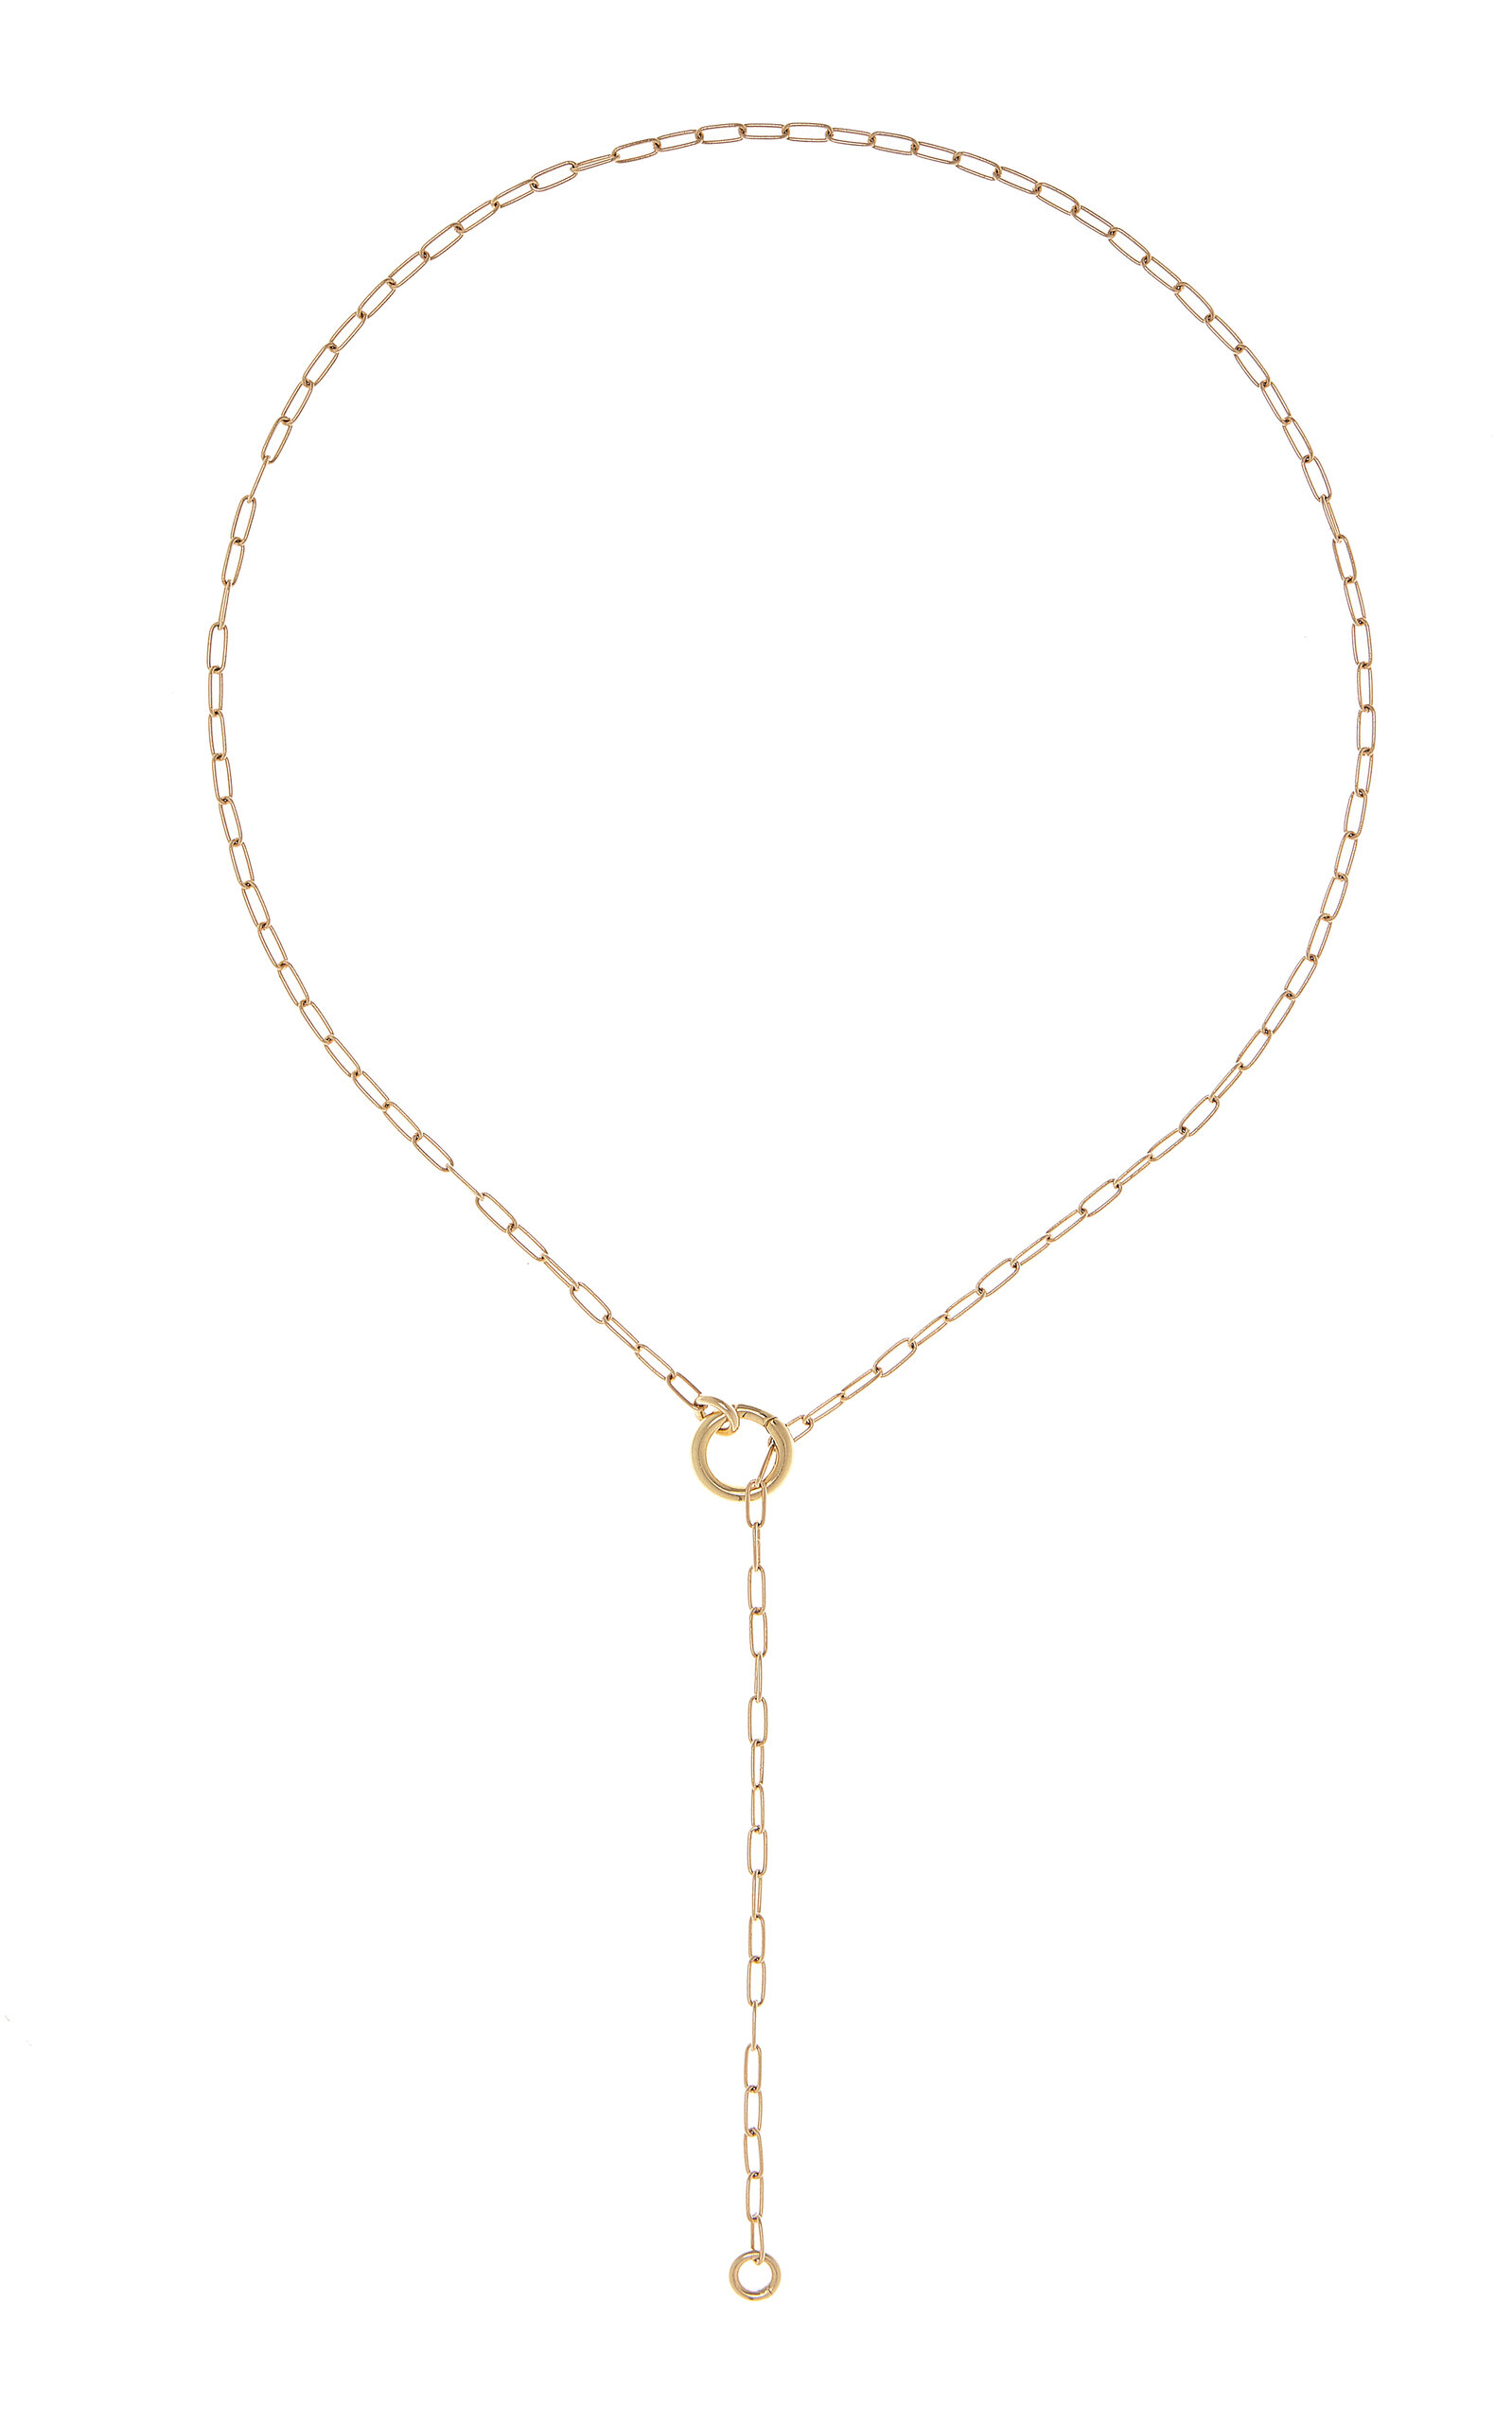 Jane Taylor 14k Yellow Gold O-link Chain Necklace